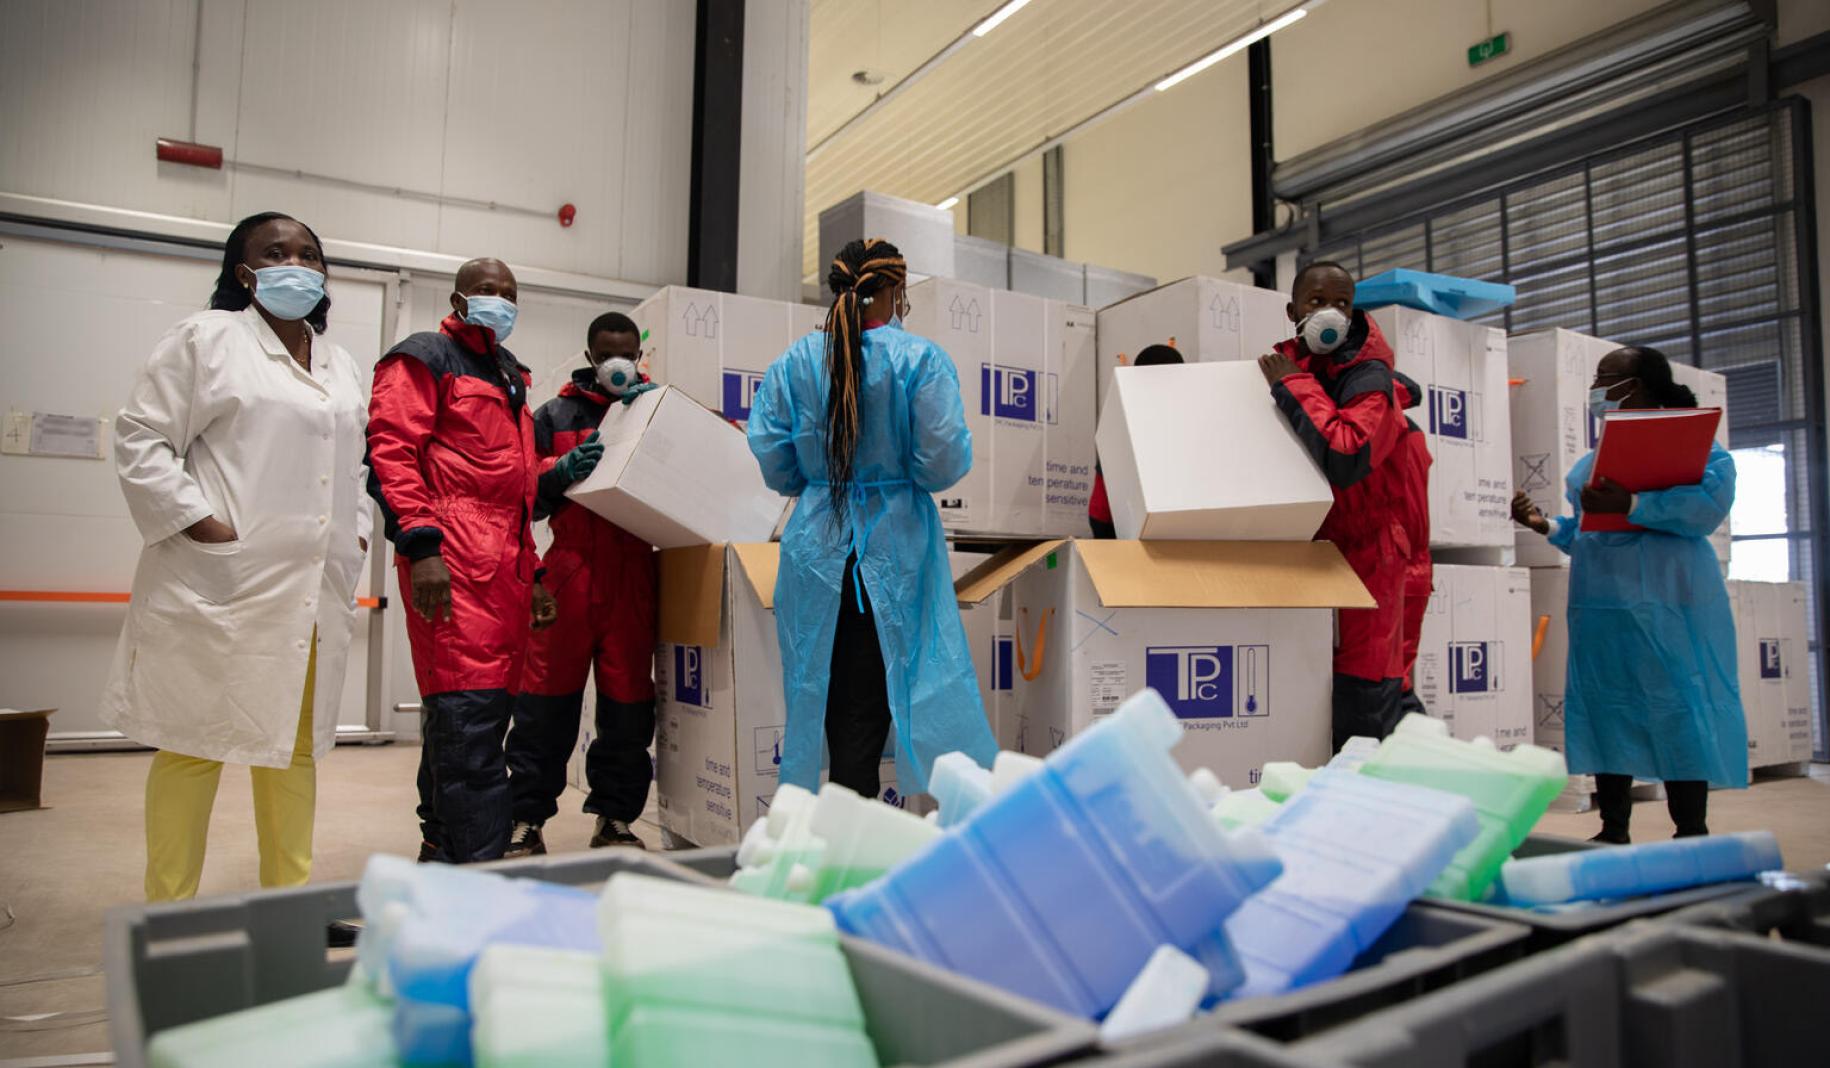 Cold chain staff unpack the COVID-19 vaccines for storage in the cold room.